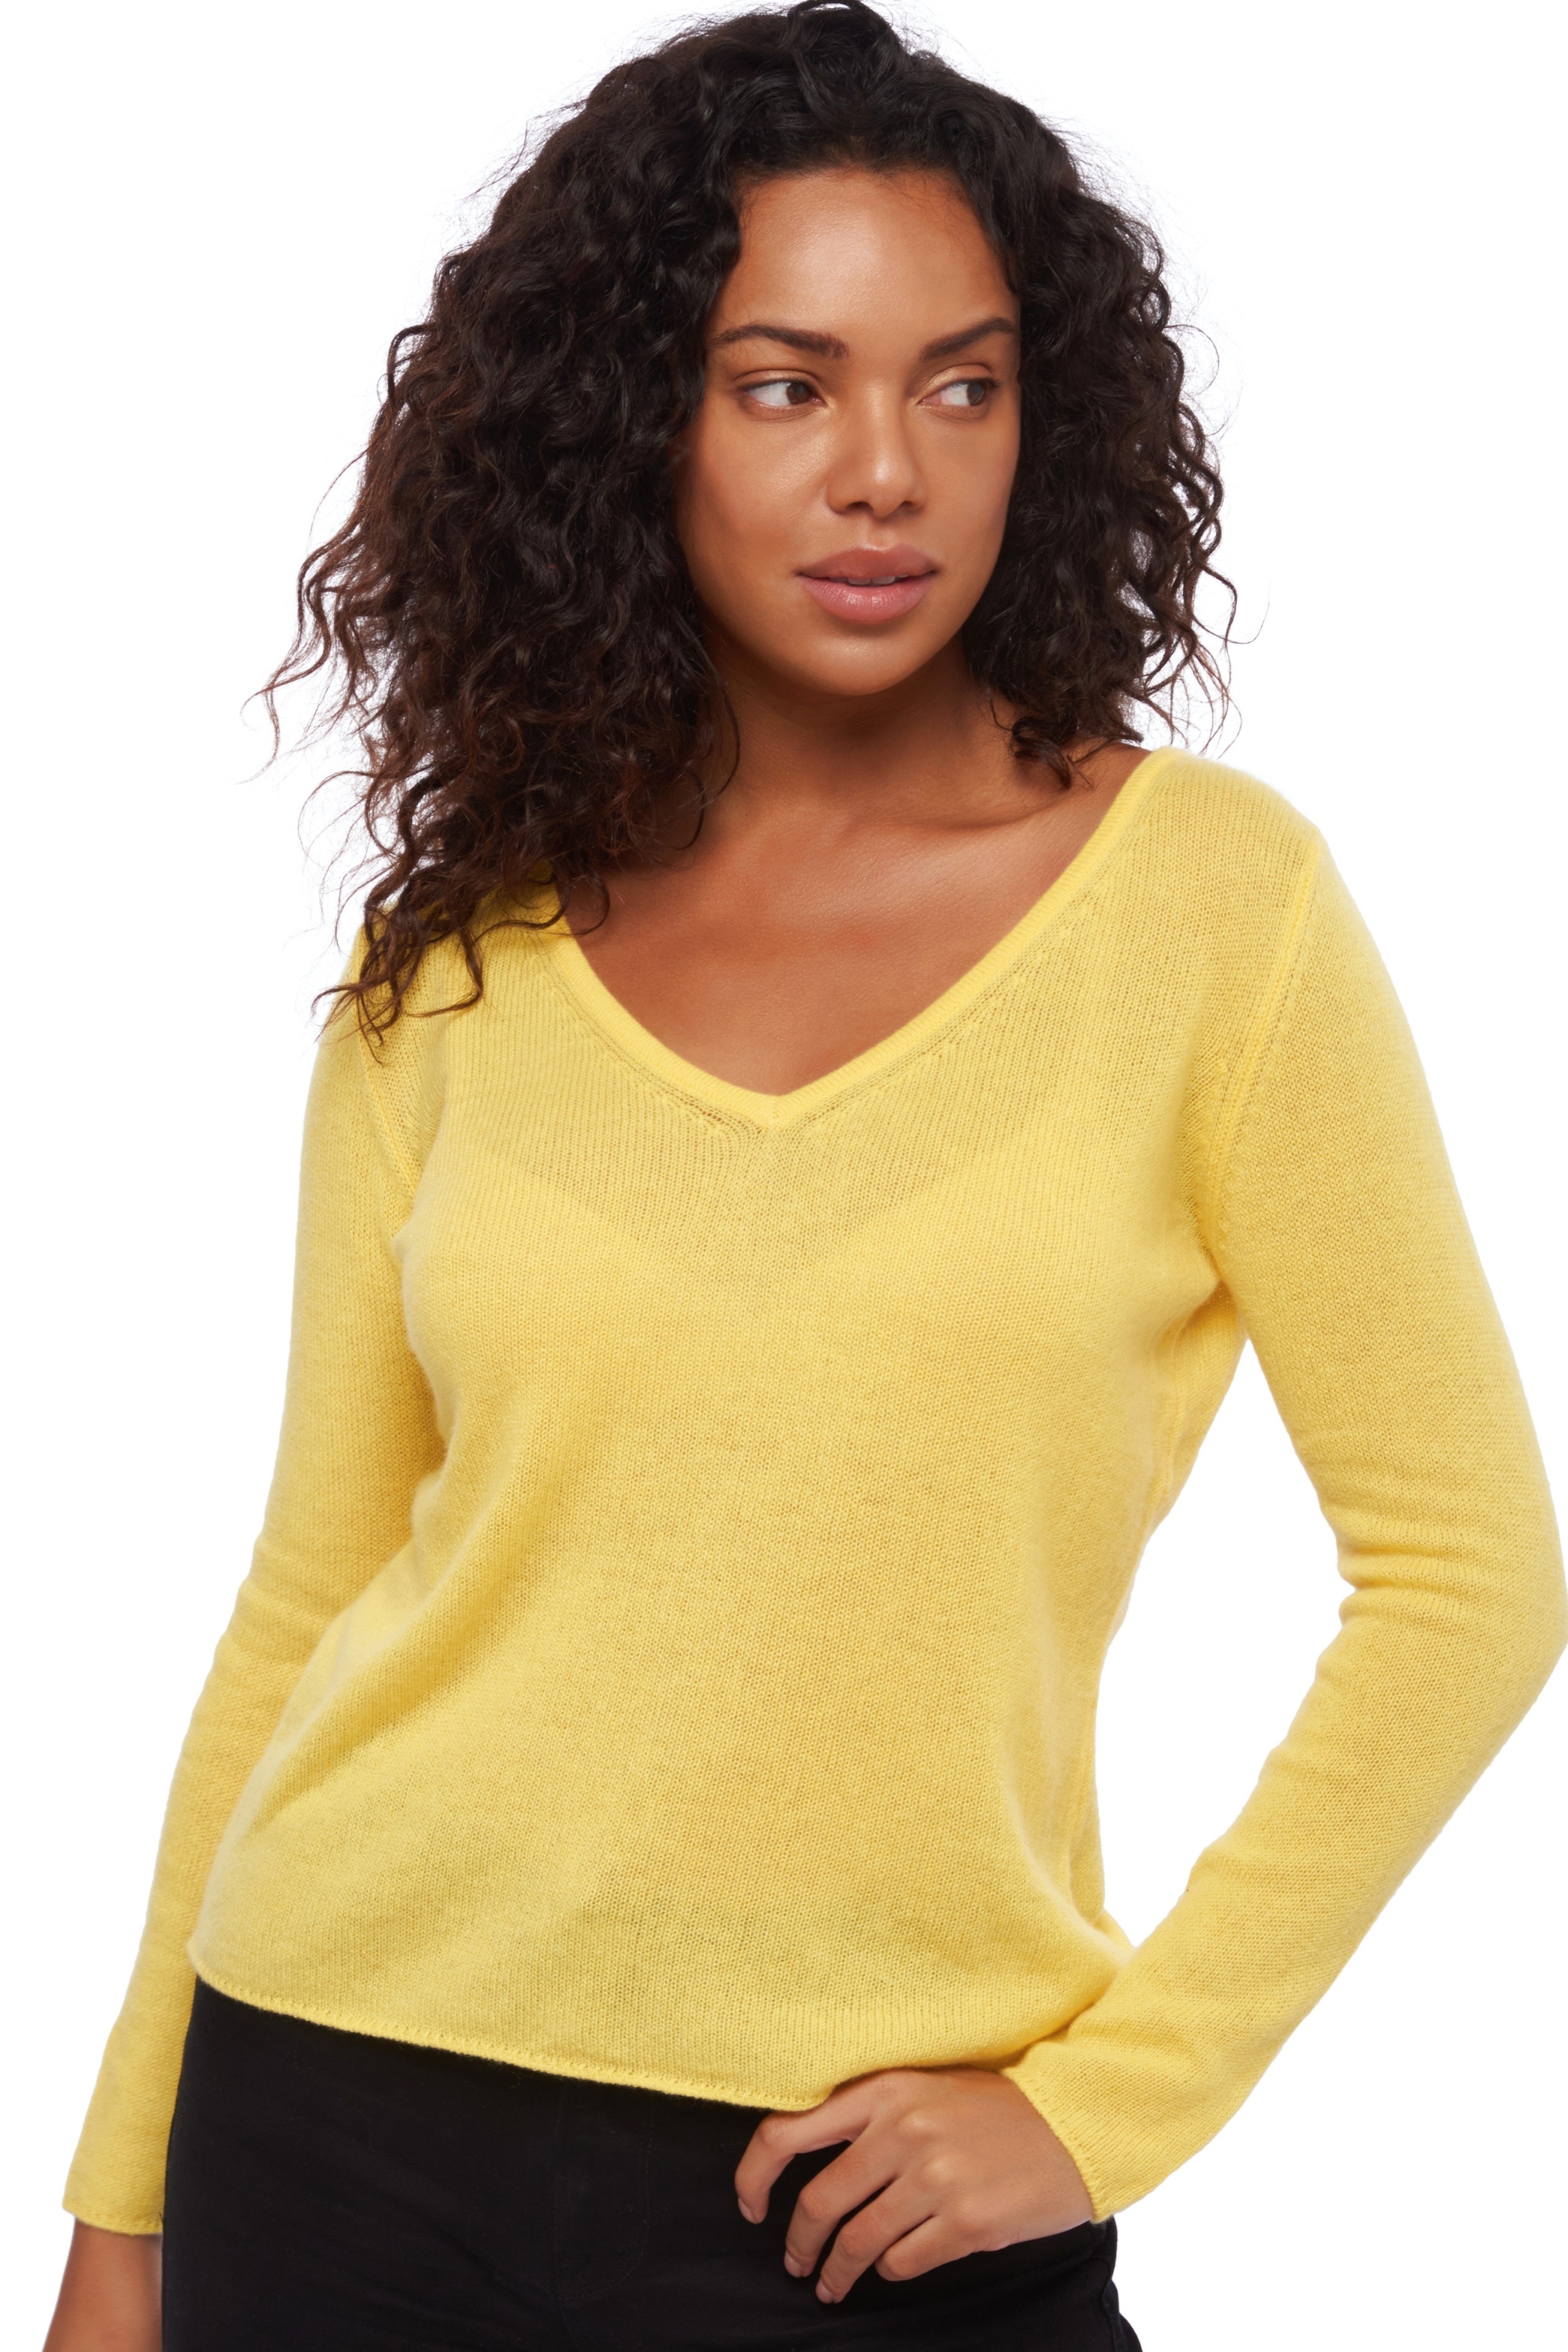 Cashmere ladies basic sweaters at low prices flavie cyber yellow xs